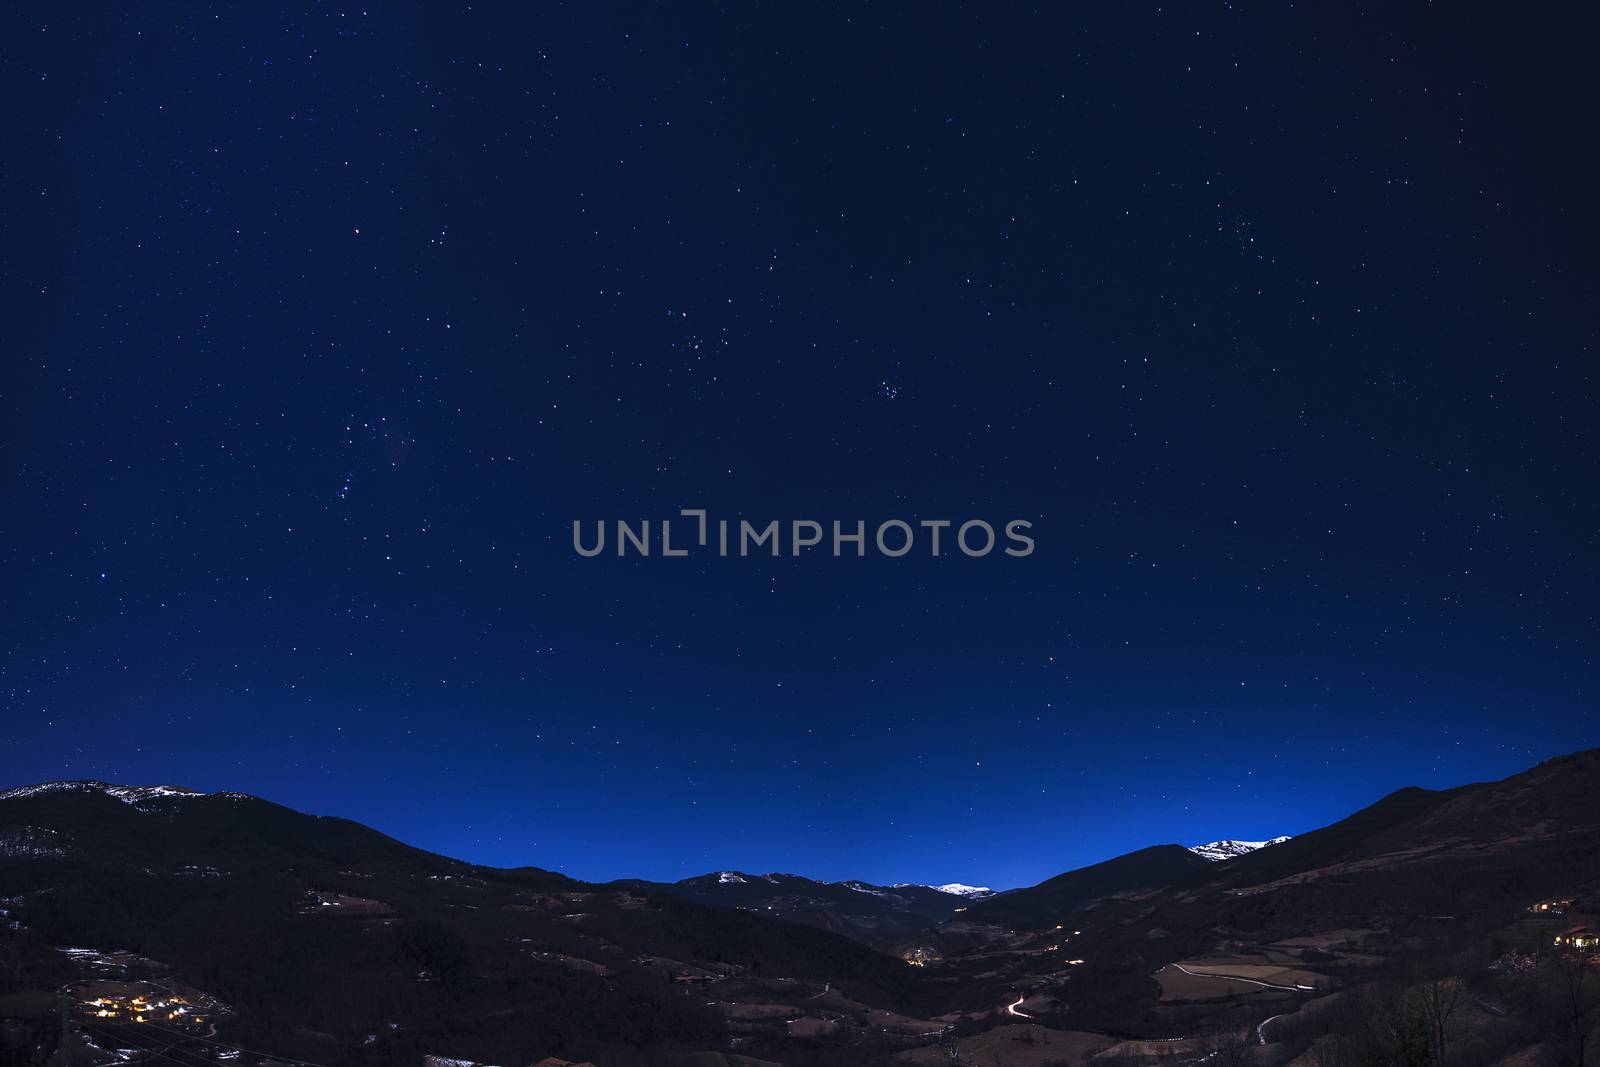 mountain landscape under night sky full of stars, you can see the lights of the houses in the valley and some snowy mountains